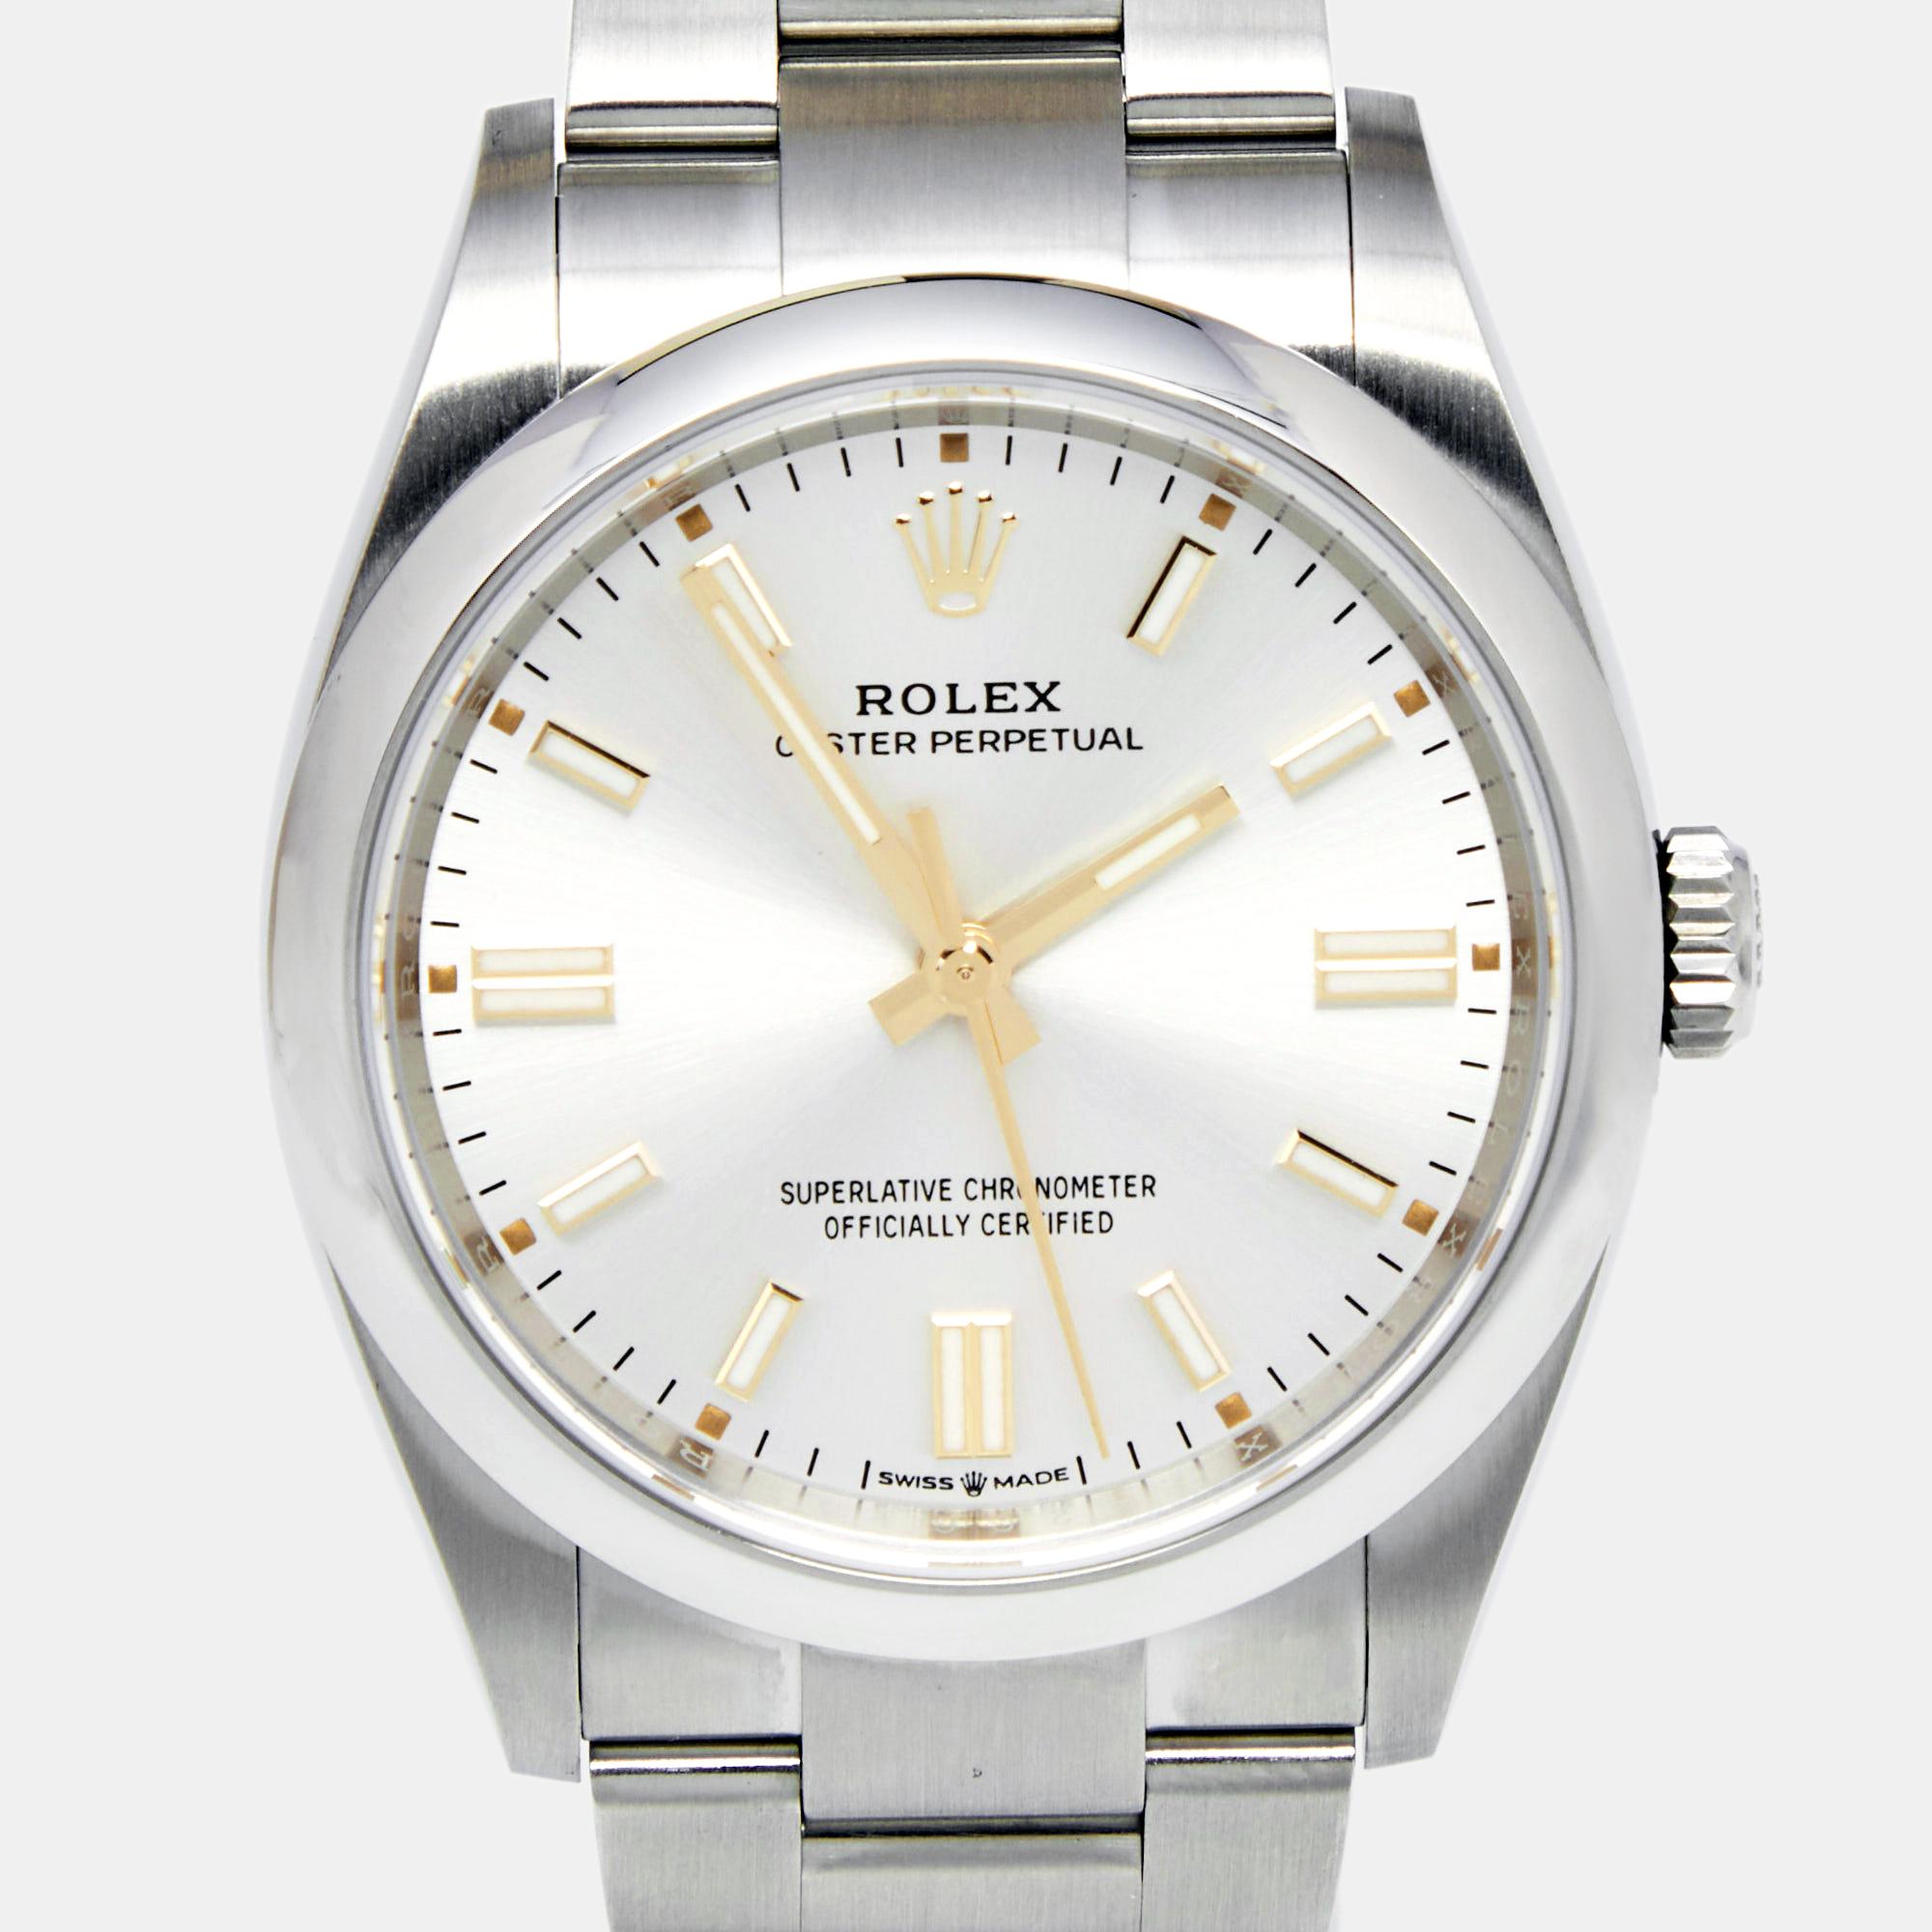 Exhibiting a classic appeal, this Oyster Perpetual M126000-0001 Automatic Wristwatch from the house of Rolex is a fine example of elevated style. This watch features a distinctive silver dial with elegant markers and three hands. The stainless steel